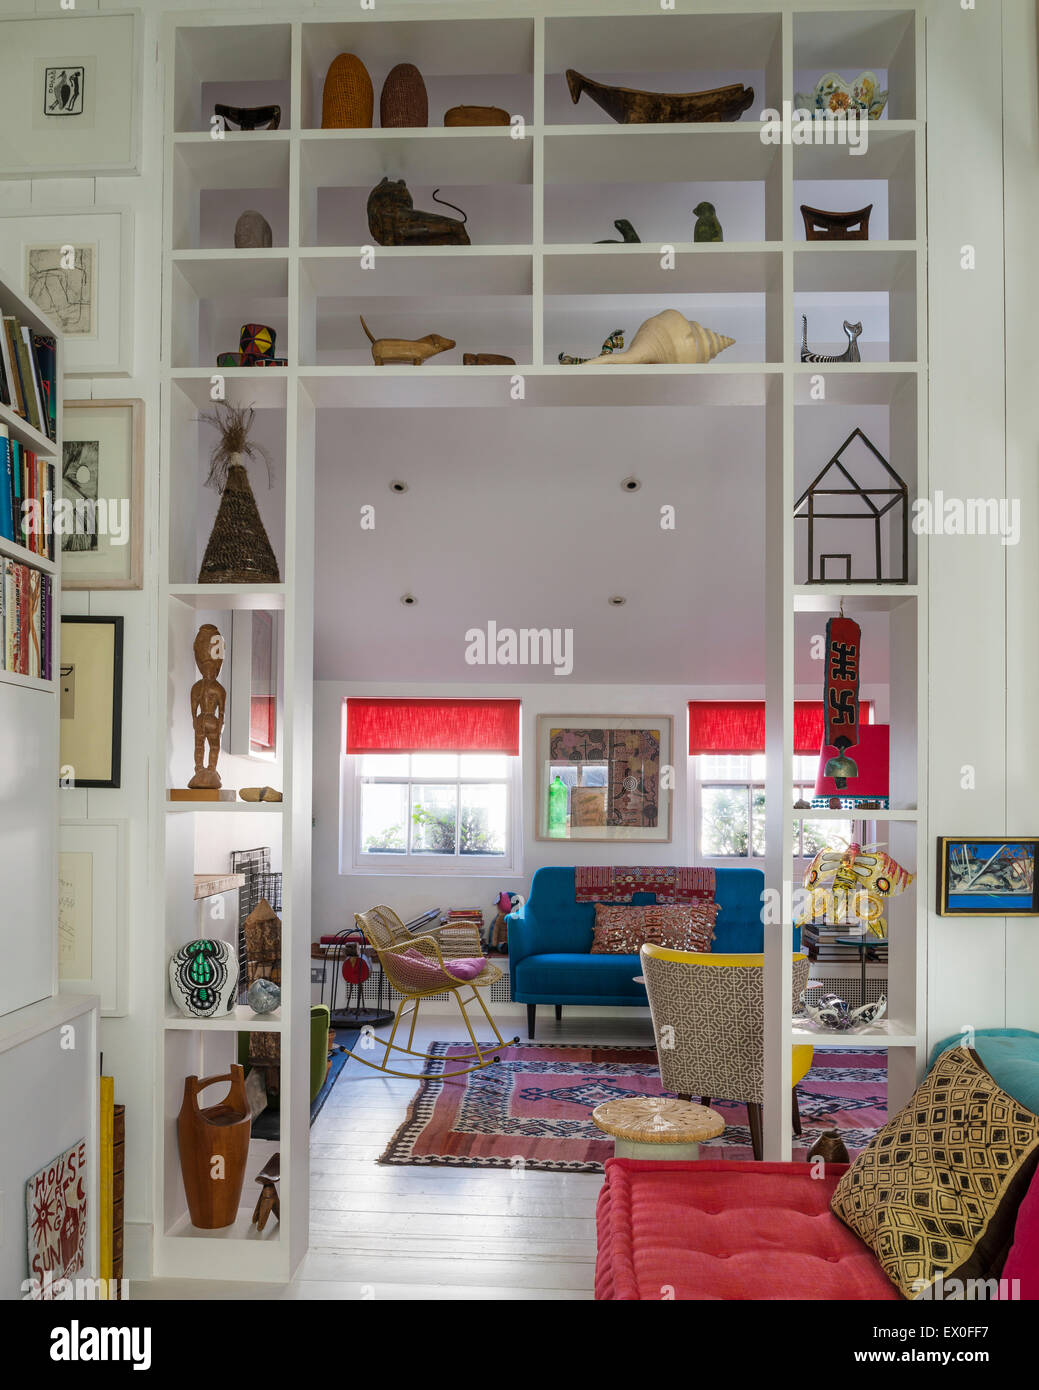 Small Sculptures And Artefacts On Open Shelving In Living Room